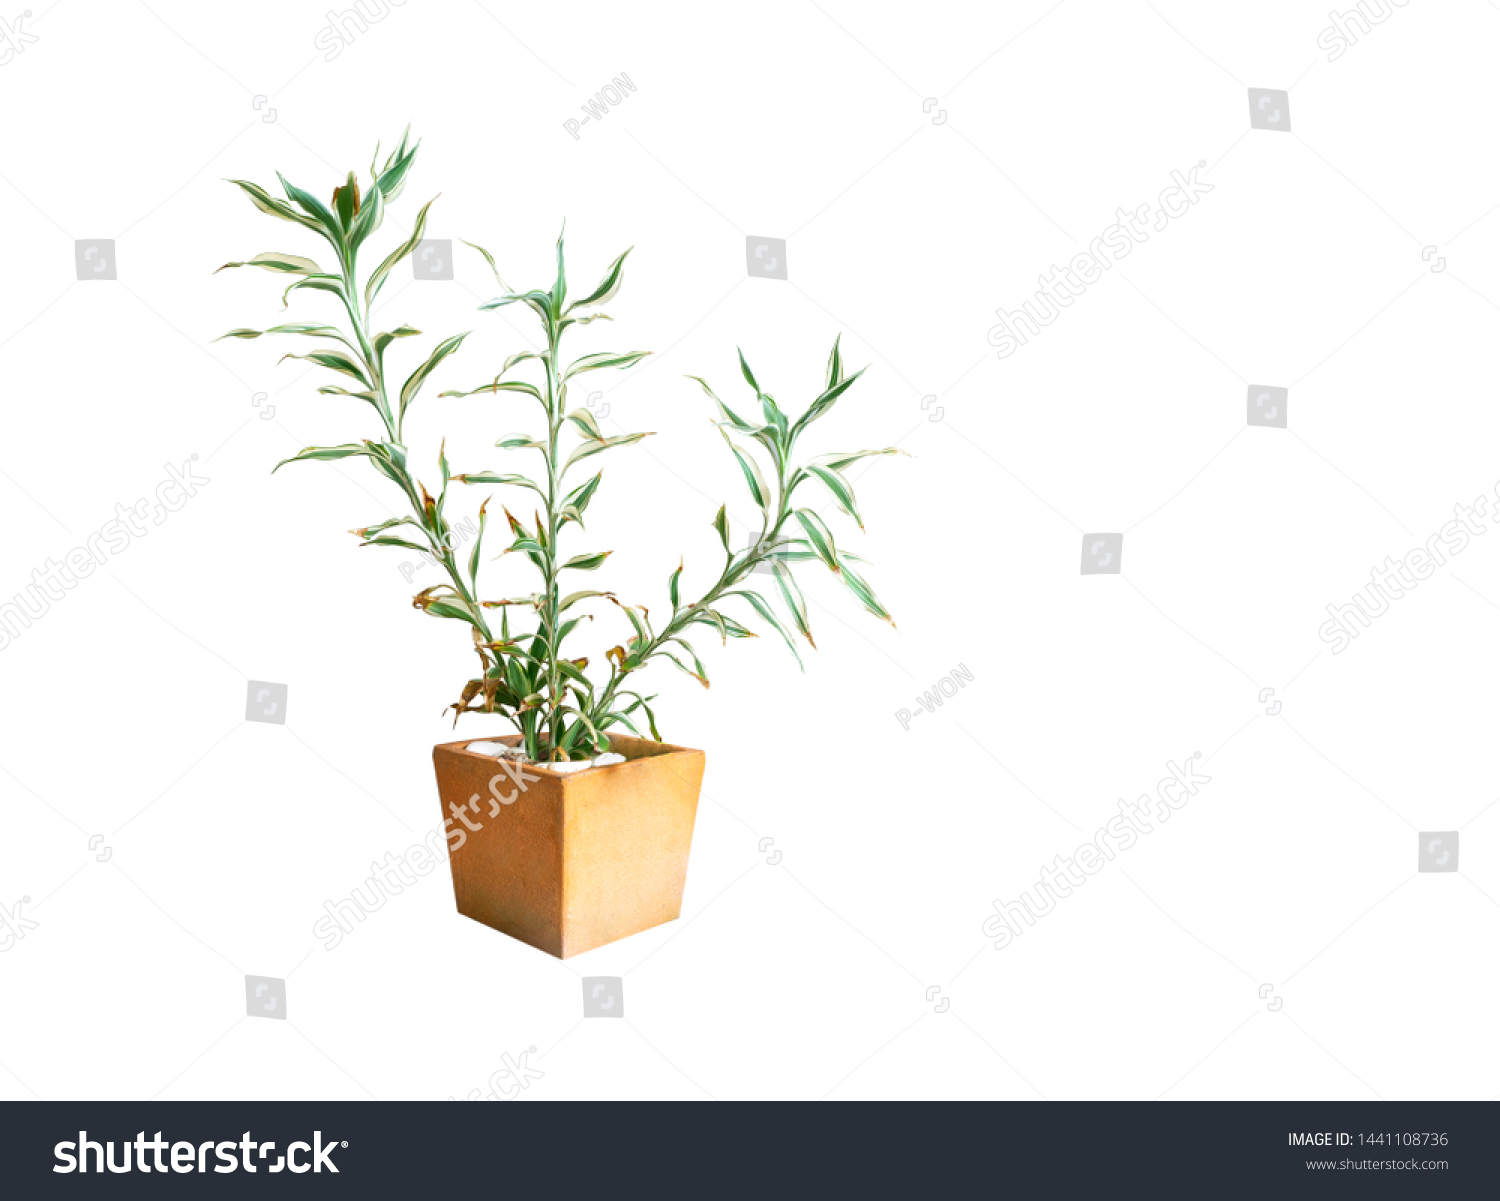 Ornamental plants or garden plants tree in pot isolated on white background with clipping path #1441108736